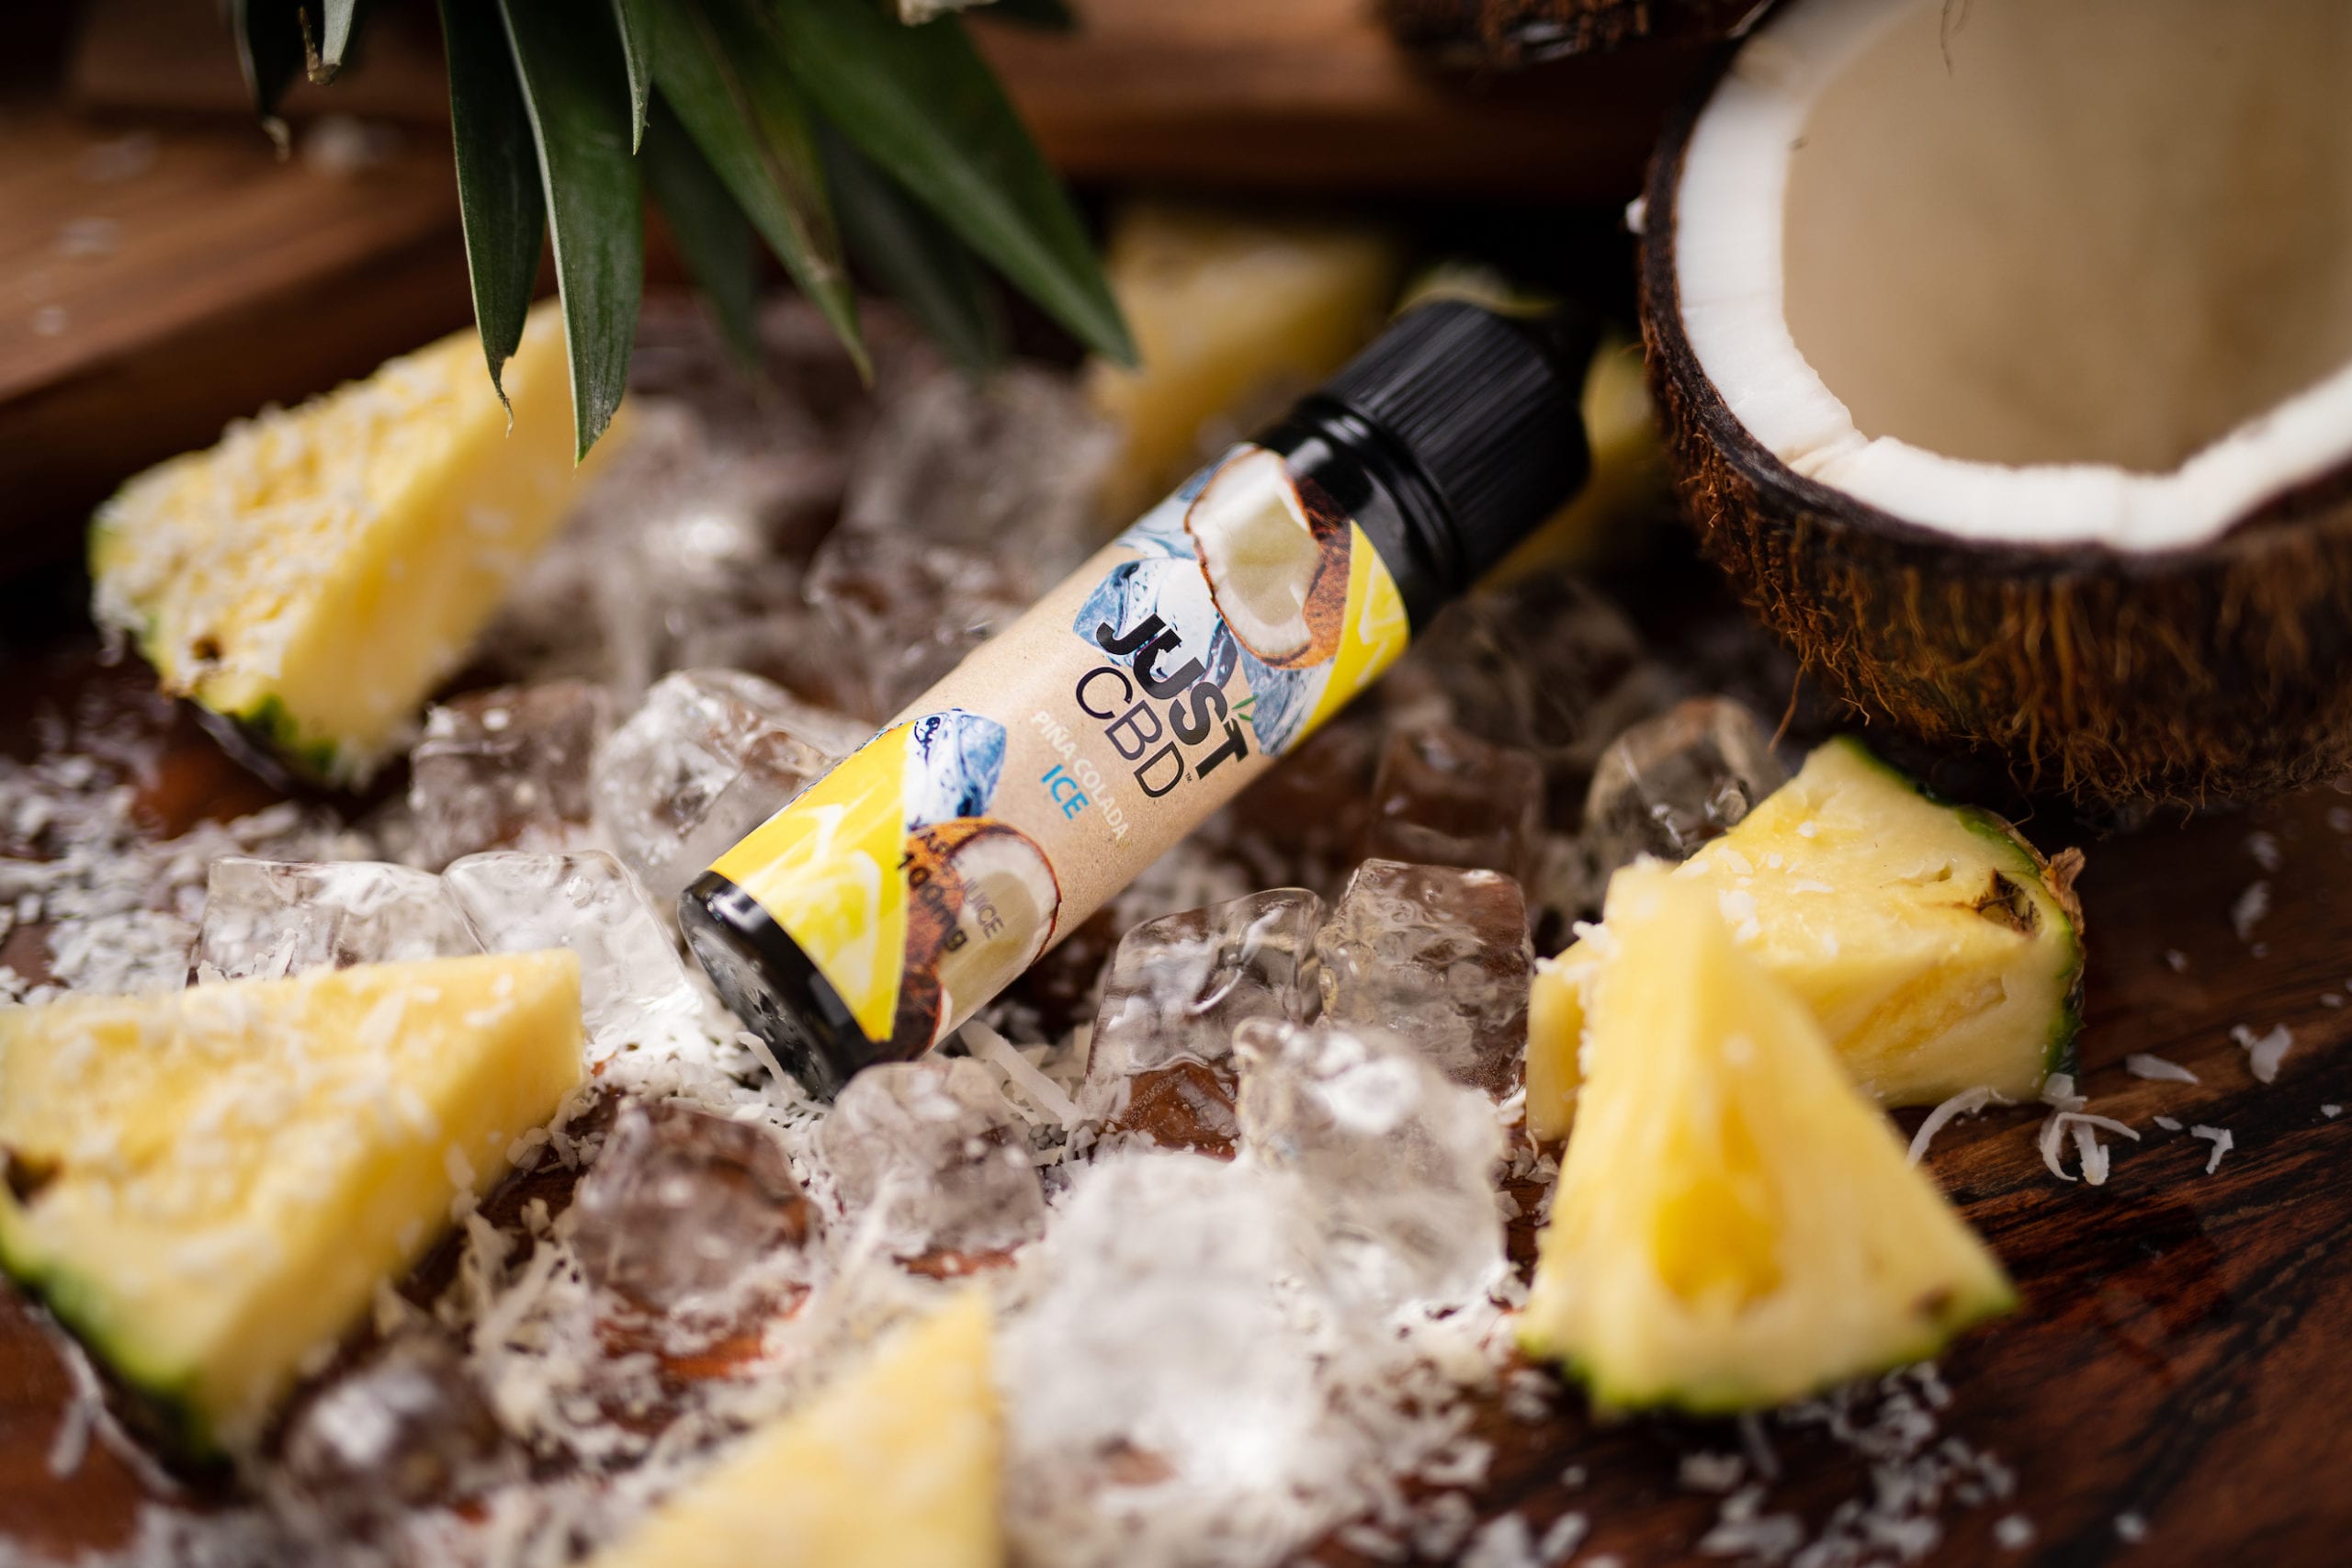 JustCBD Product Photography and Just CBD Products Pina Colada ICE vape juice container on display surrounded with chunks of pineapple and coconut